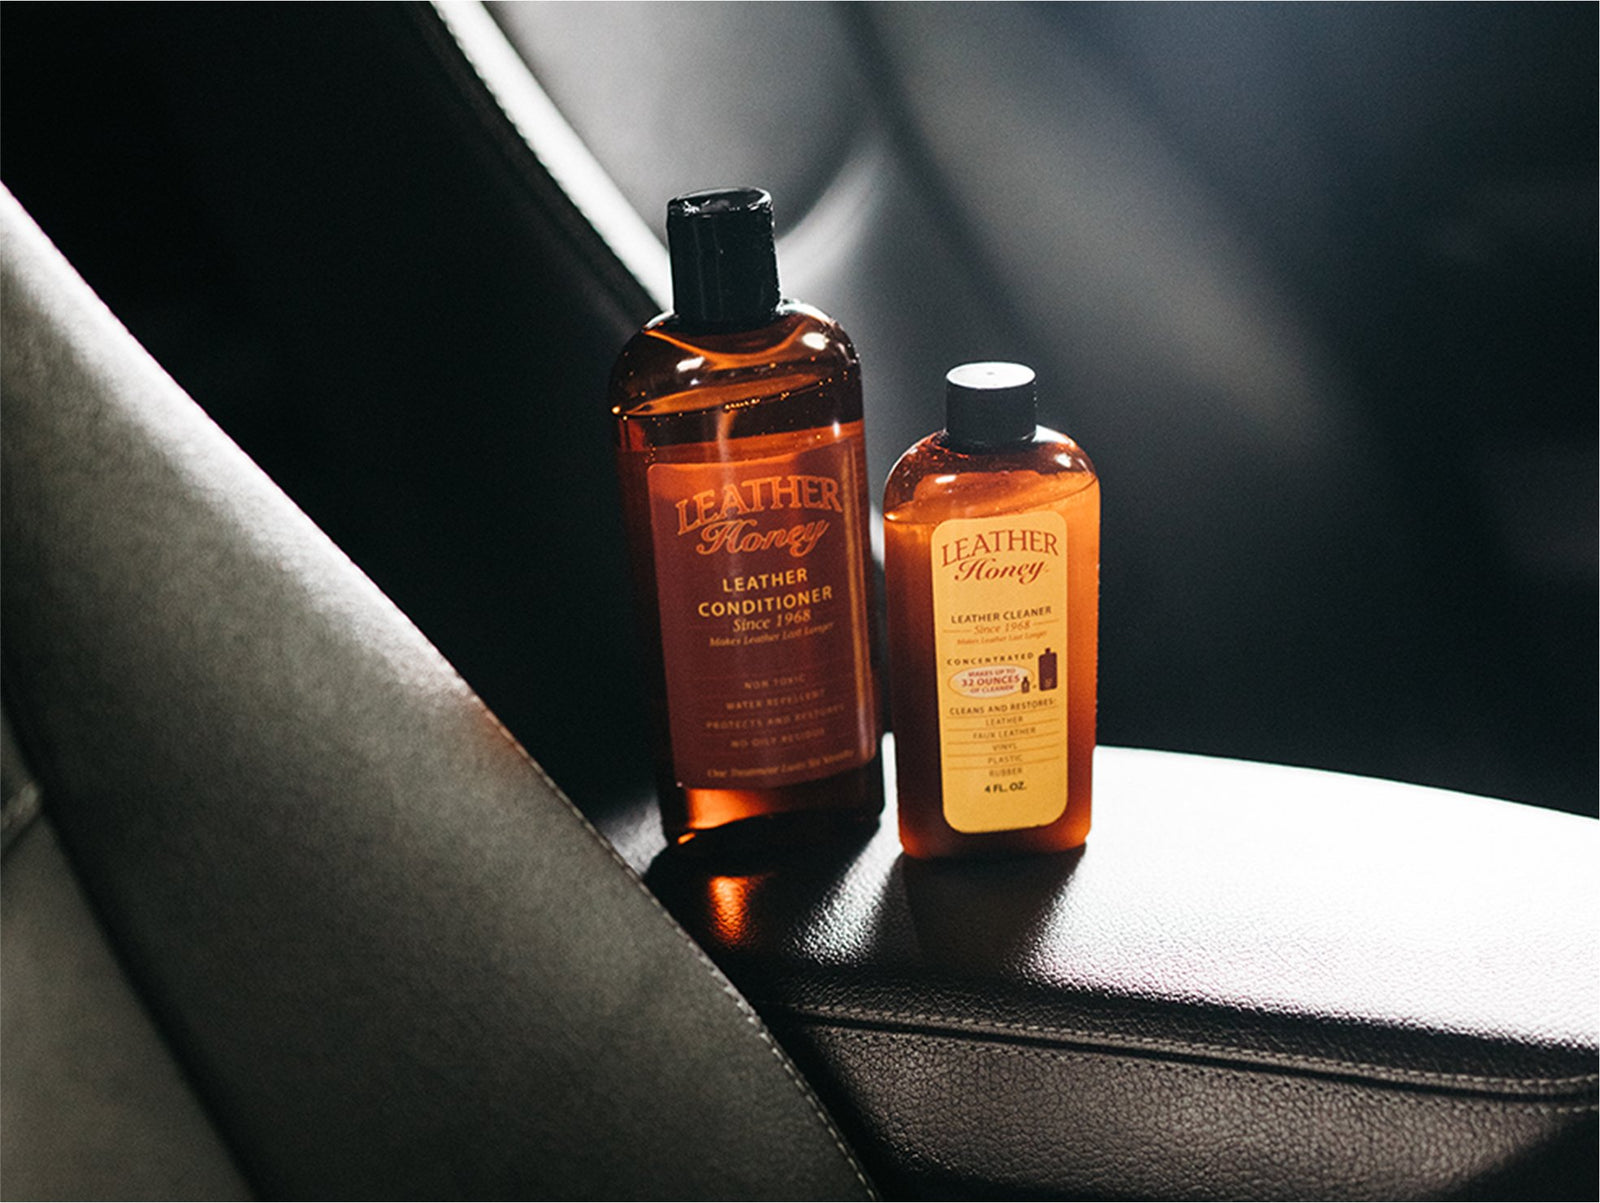 Car Leather Cleaner and Conditioner